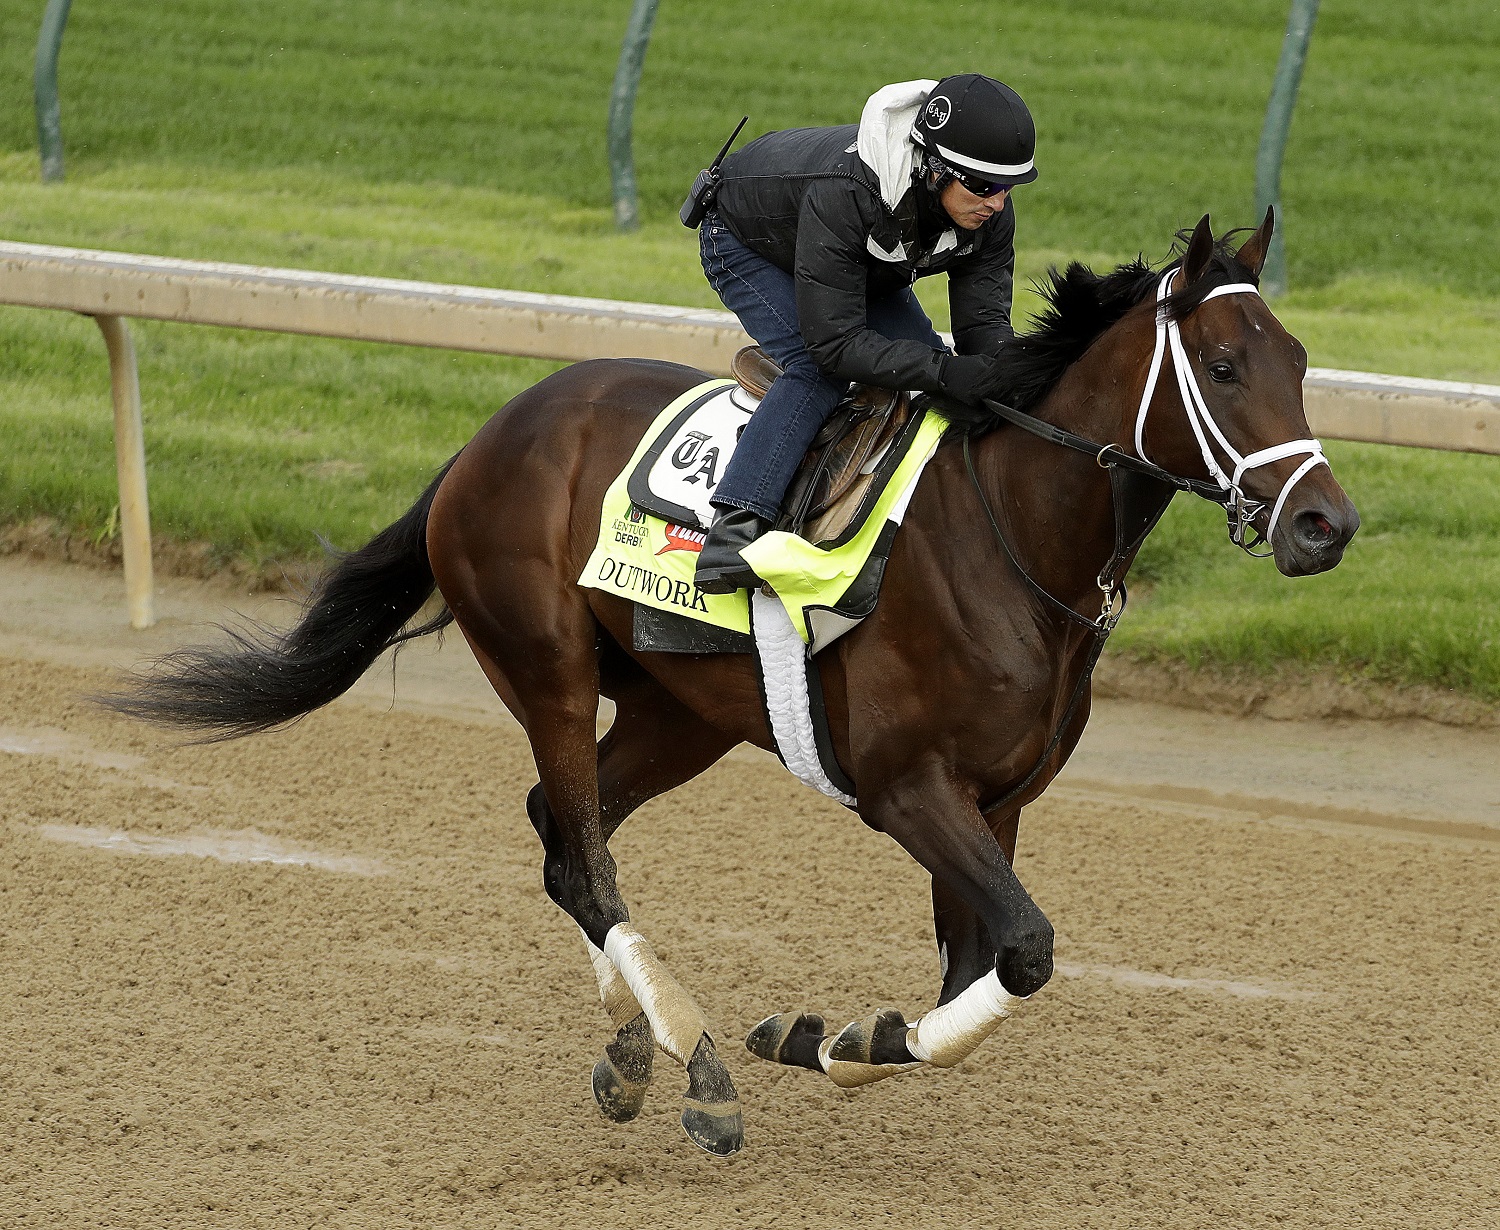 Exercise rider Hector Ramos rides Kentucky Derby entrant Outwork during a workout at Churchill Downs Thursday, May 5, 2016, in Louisville, Ky. The 142nd running of the Kentucky Derby is scheduled for Saturday, May 7. (AP Photo/Charlie Riedel)